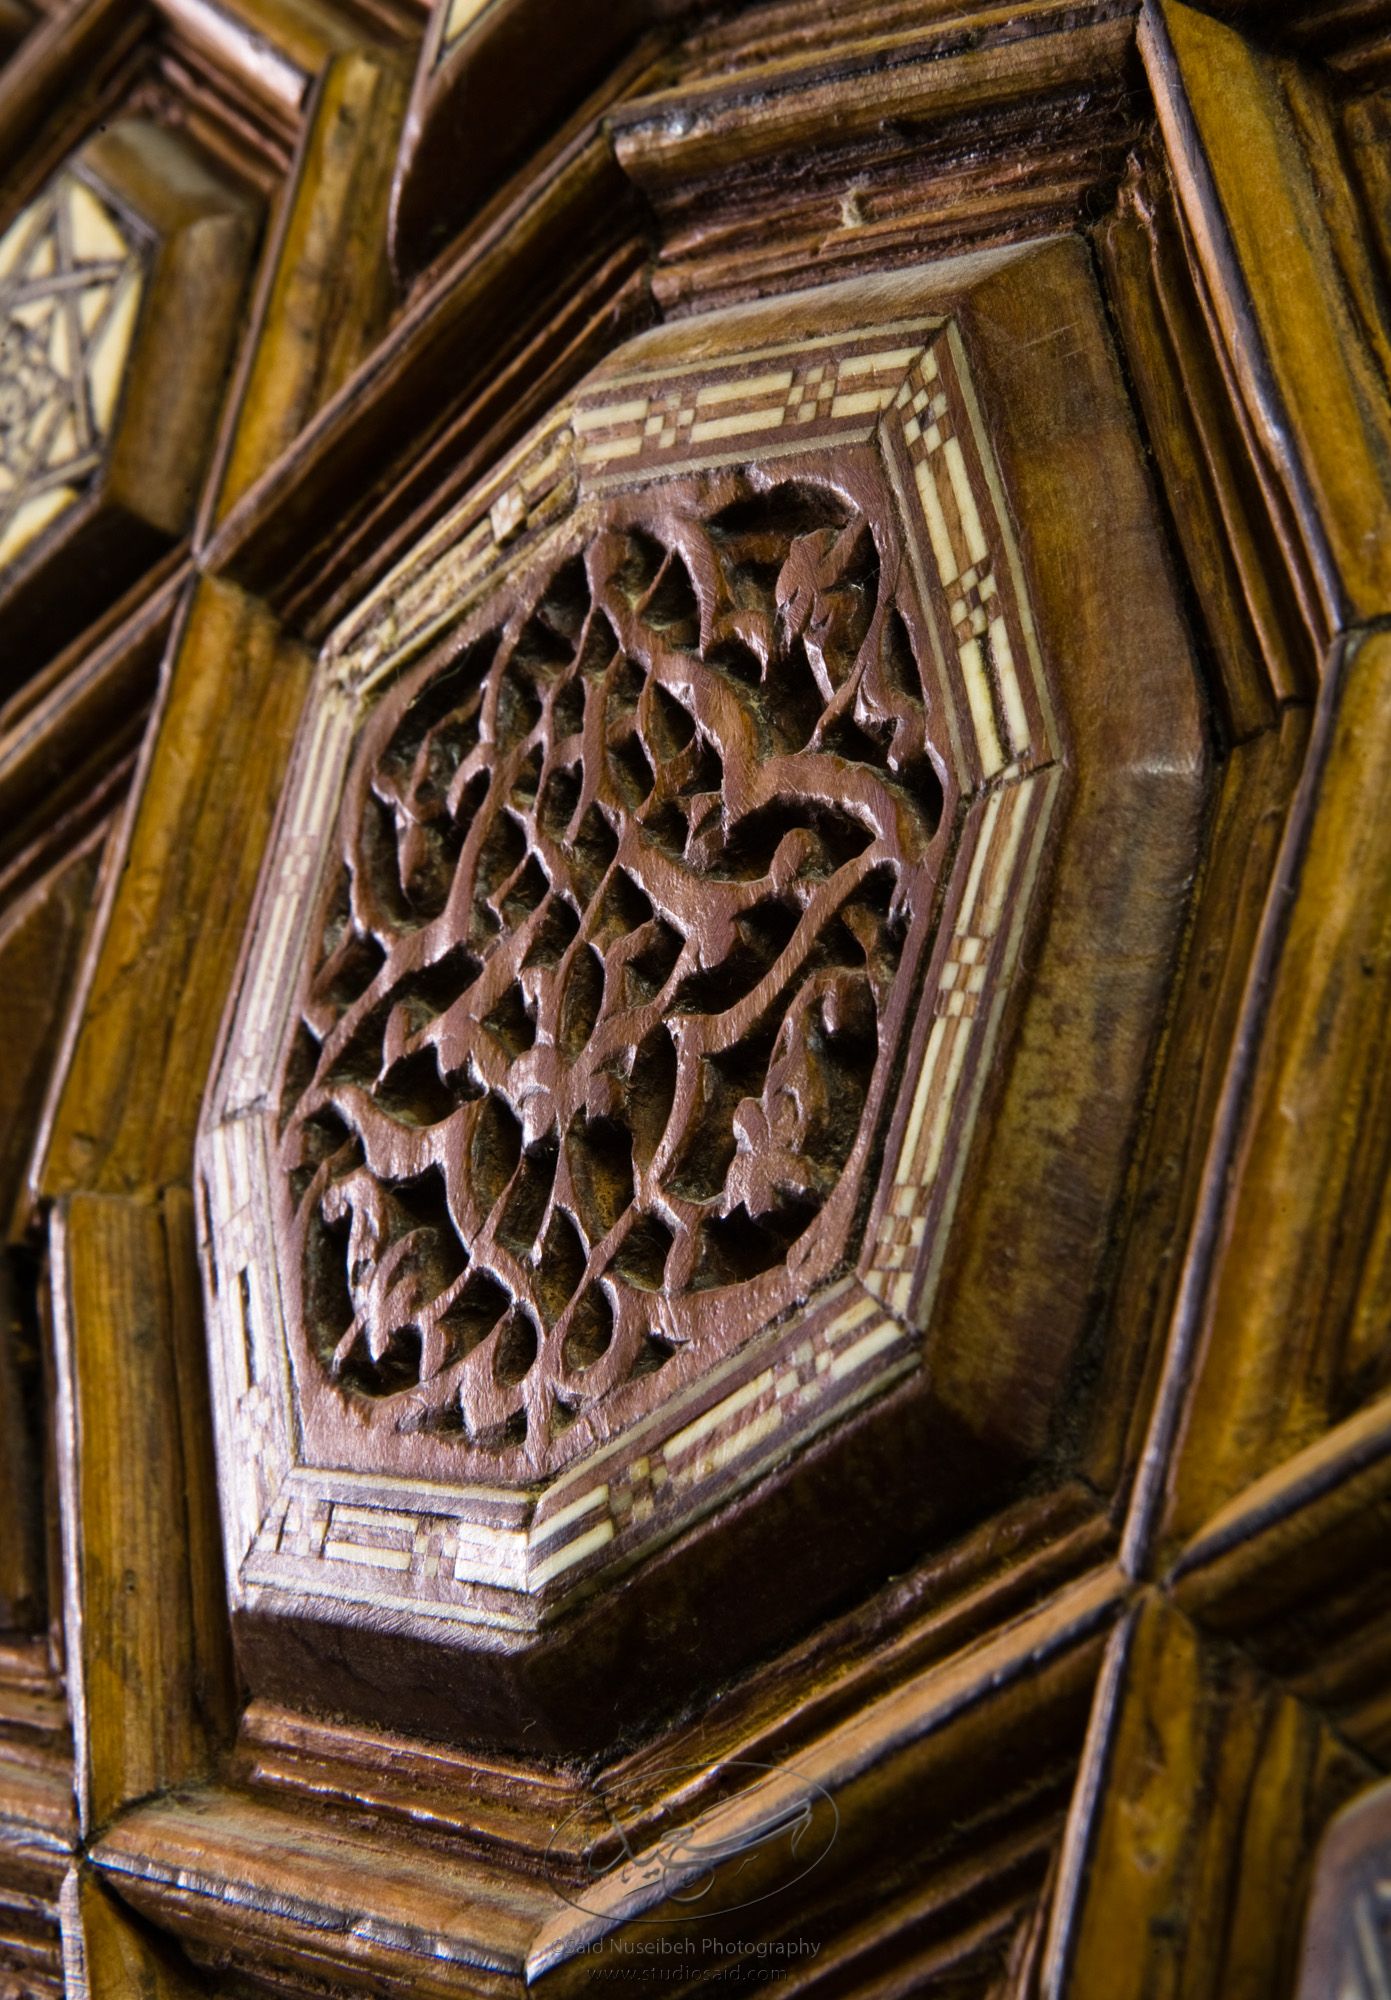 "Minbar, Carved Woodwork and Inlay Detail"The late-13th / early-14th c. Mamluk minbar, or pulpit, of Sultan al-Nasir Muhammad, the ninth Mamluk Sultan from Cairo and son of Qalawun. The minbar was located in the Umayyad Mosque in Aleppo, Haleb, prior to its damage and disappearance in May 2013.